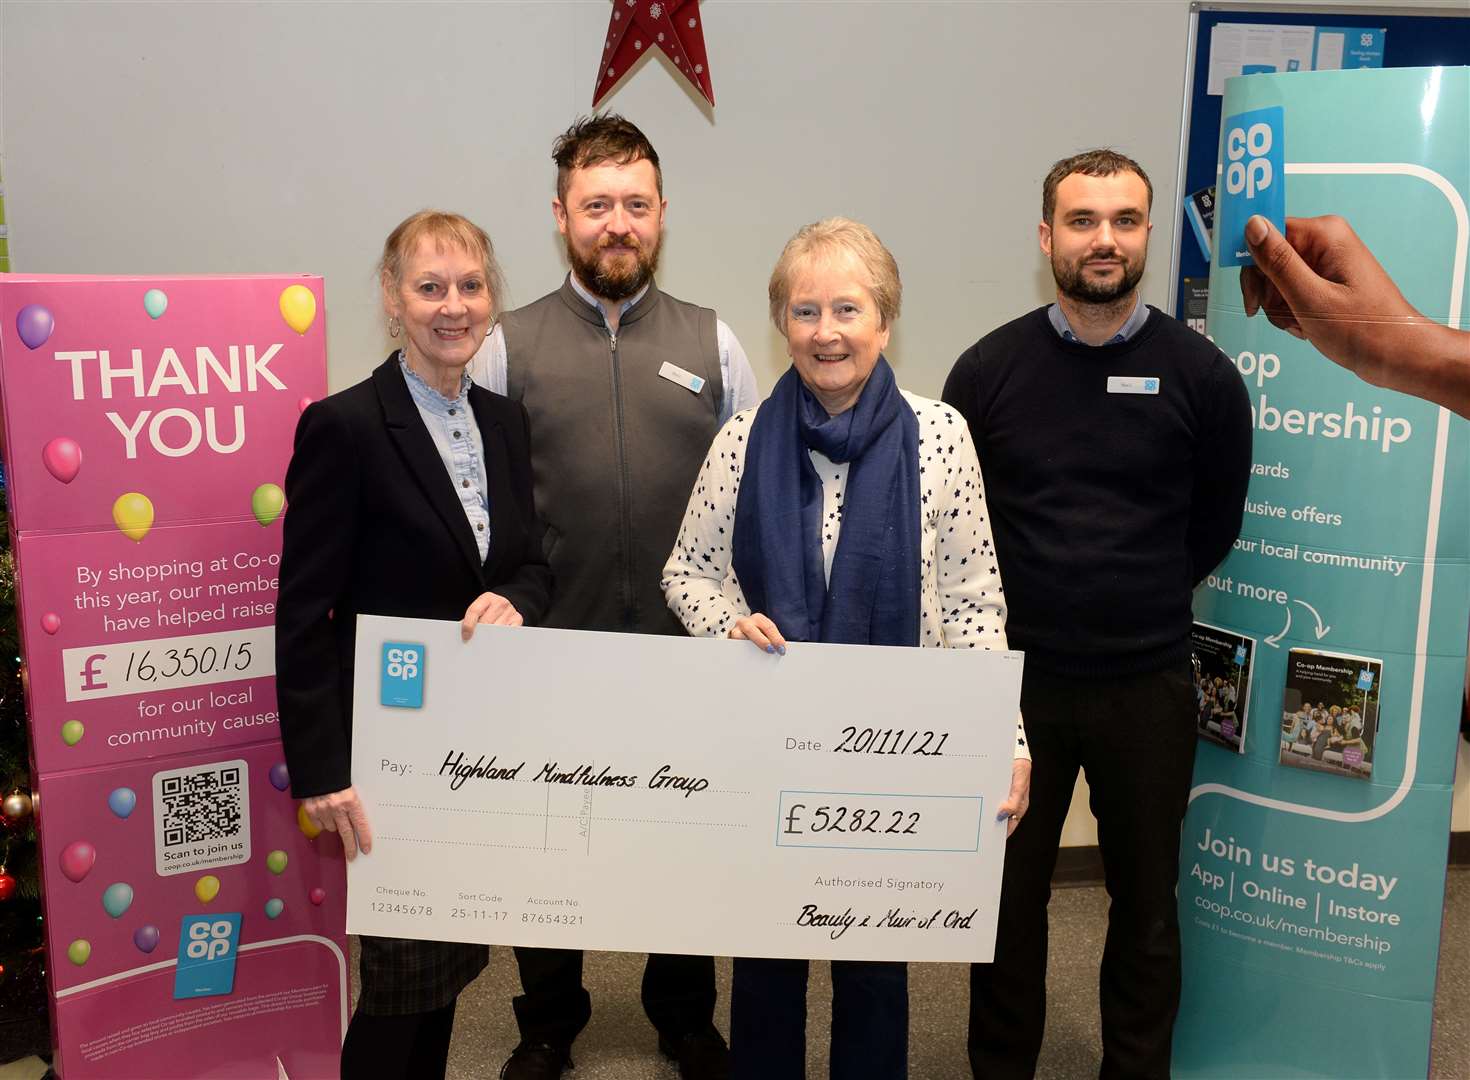 Kate Boyd and Christine Beck receive £5282.22 from Neil Morrison and Neil Cameron of Co-op for Highland Mindfulness Group. Picture Gary Anthony